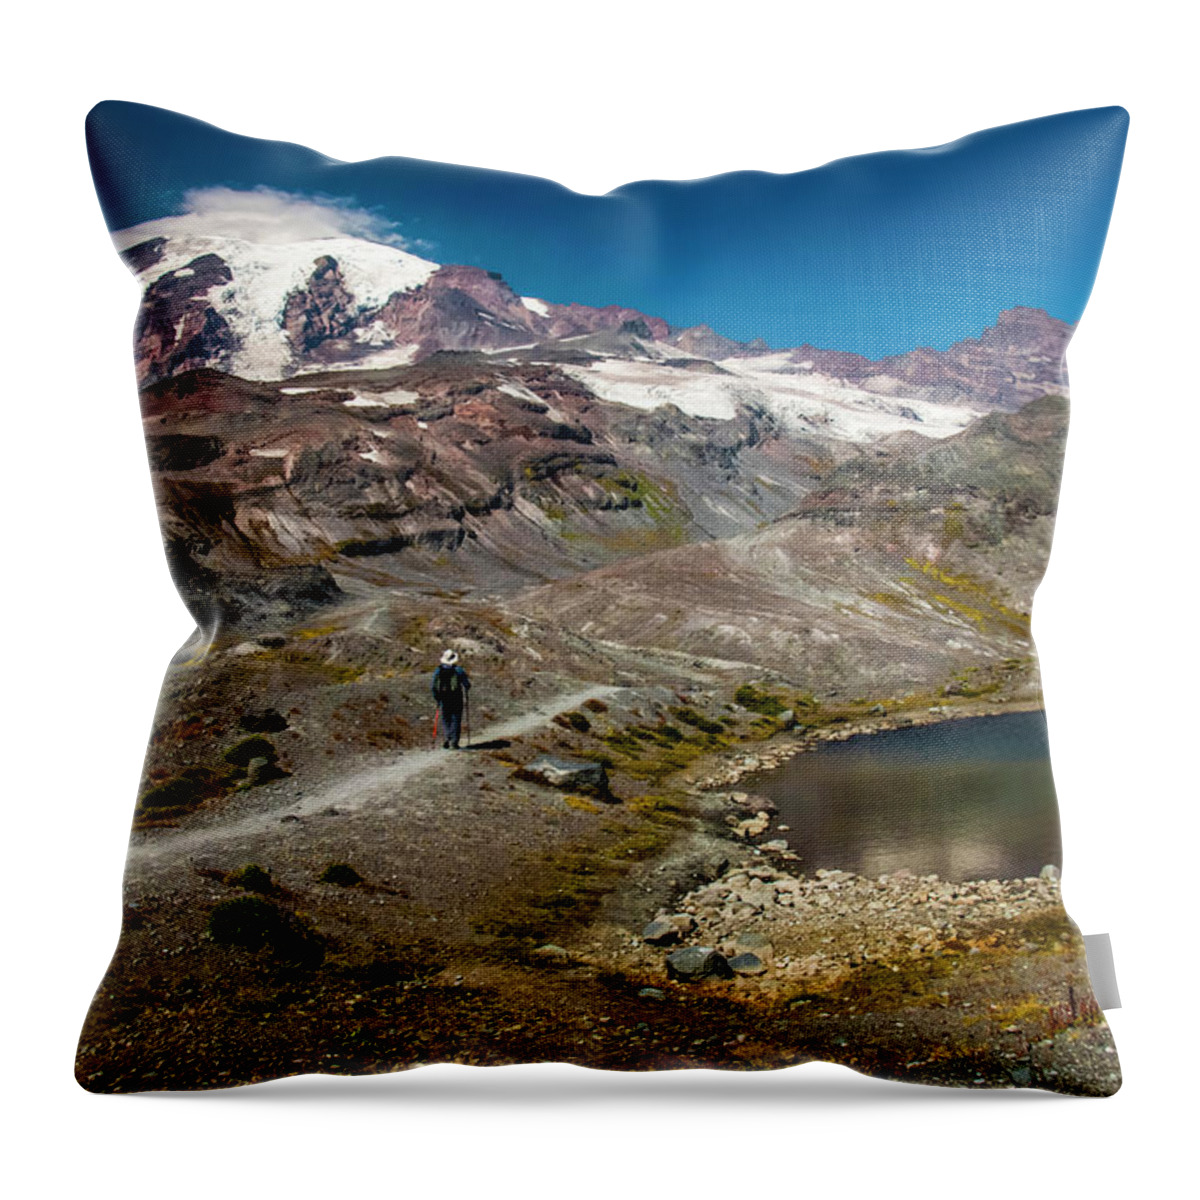 Mount Rainier National Park Throw Pillow featuring the photograph Perfect Solitude by Doug Scrima